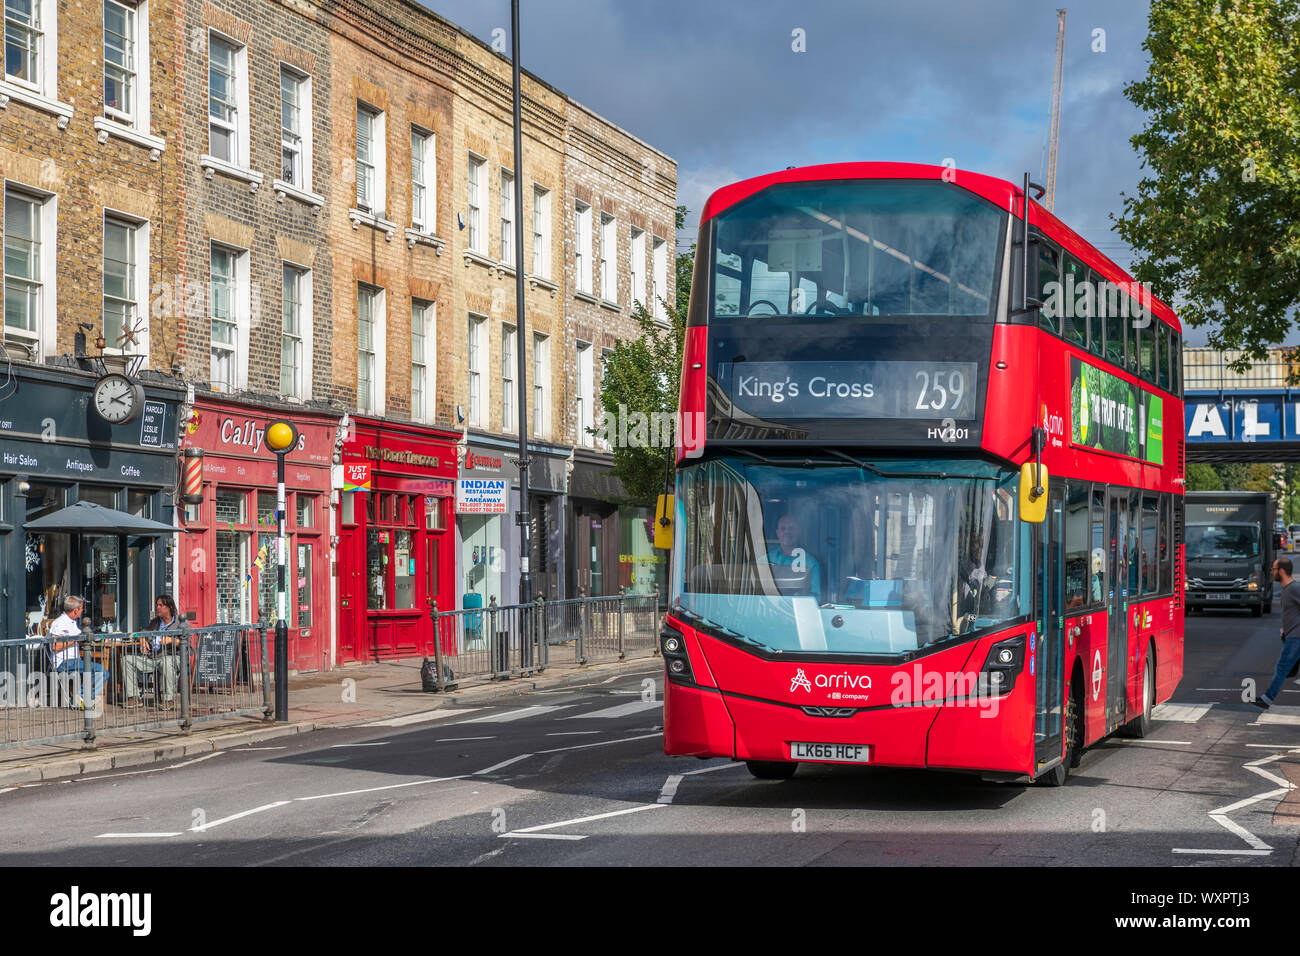 The Caledonian Road, or 'The Cally' as it known, is the main artery road through the North London borough of Islington. Stock Photo